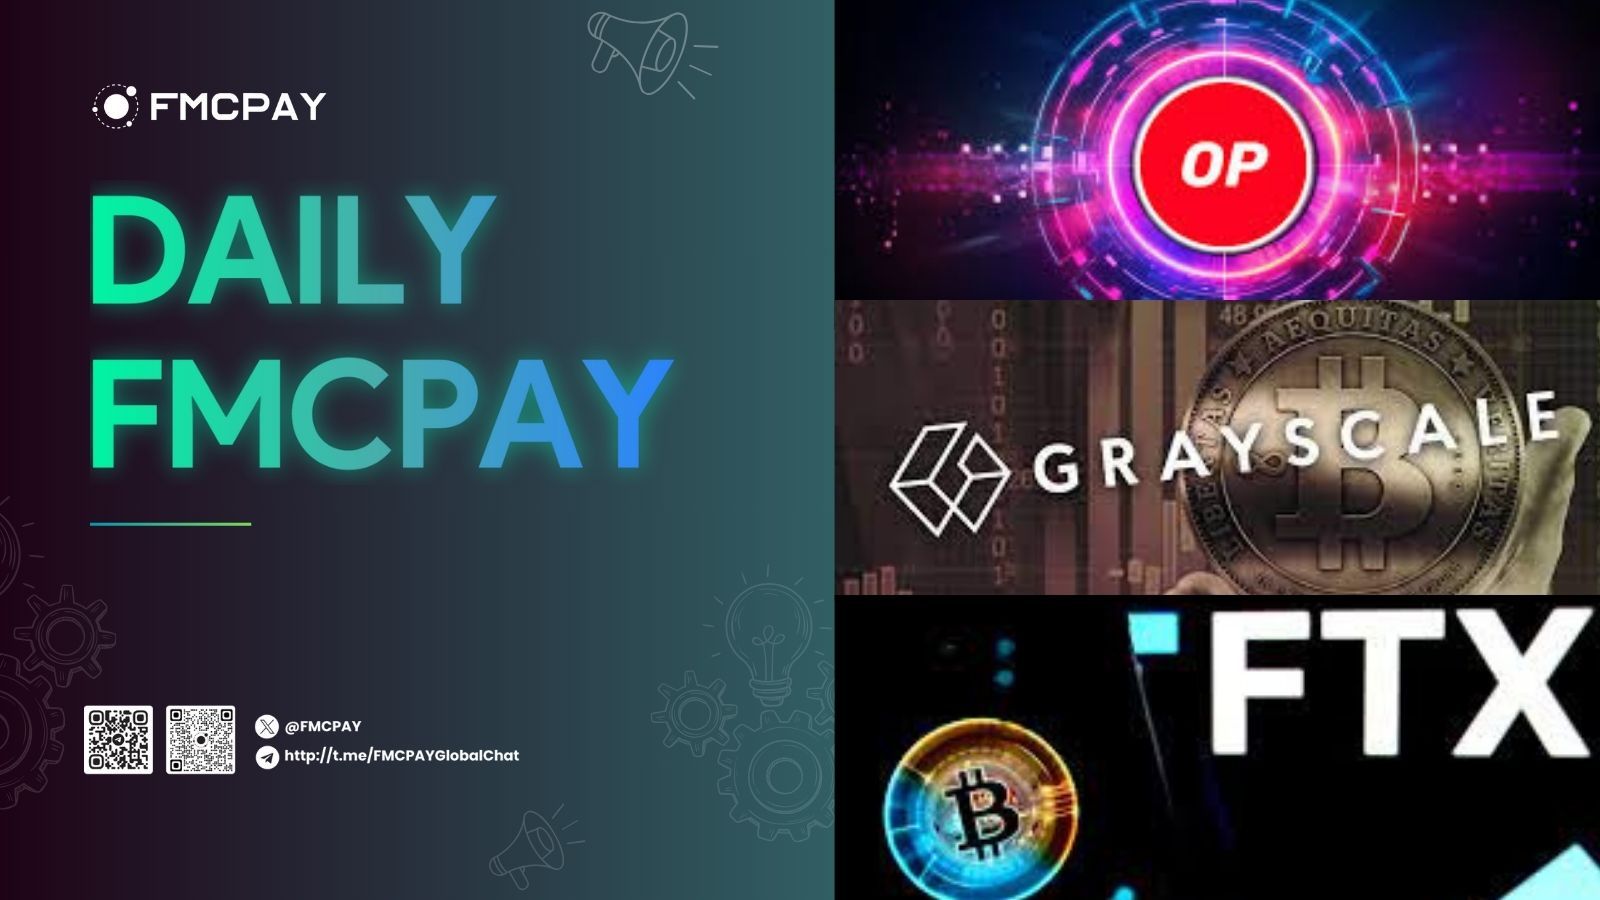 fmcpay 550m crypto airdrop started by mode network on optimism